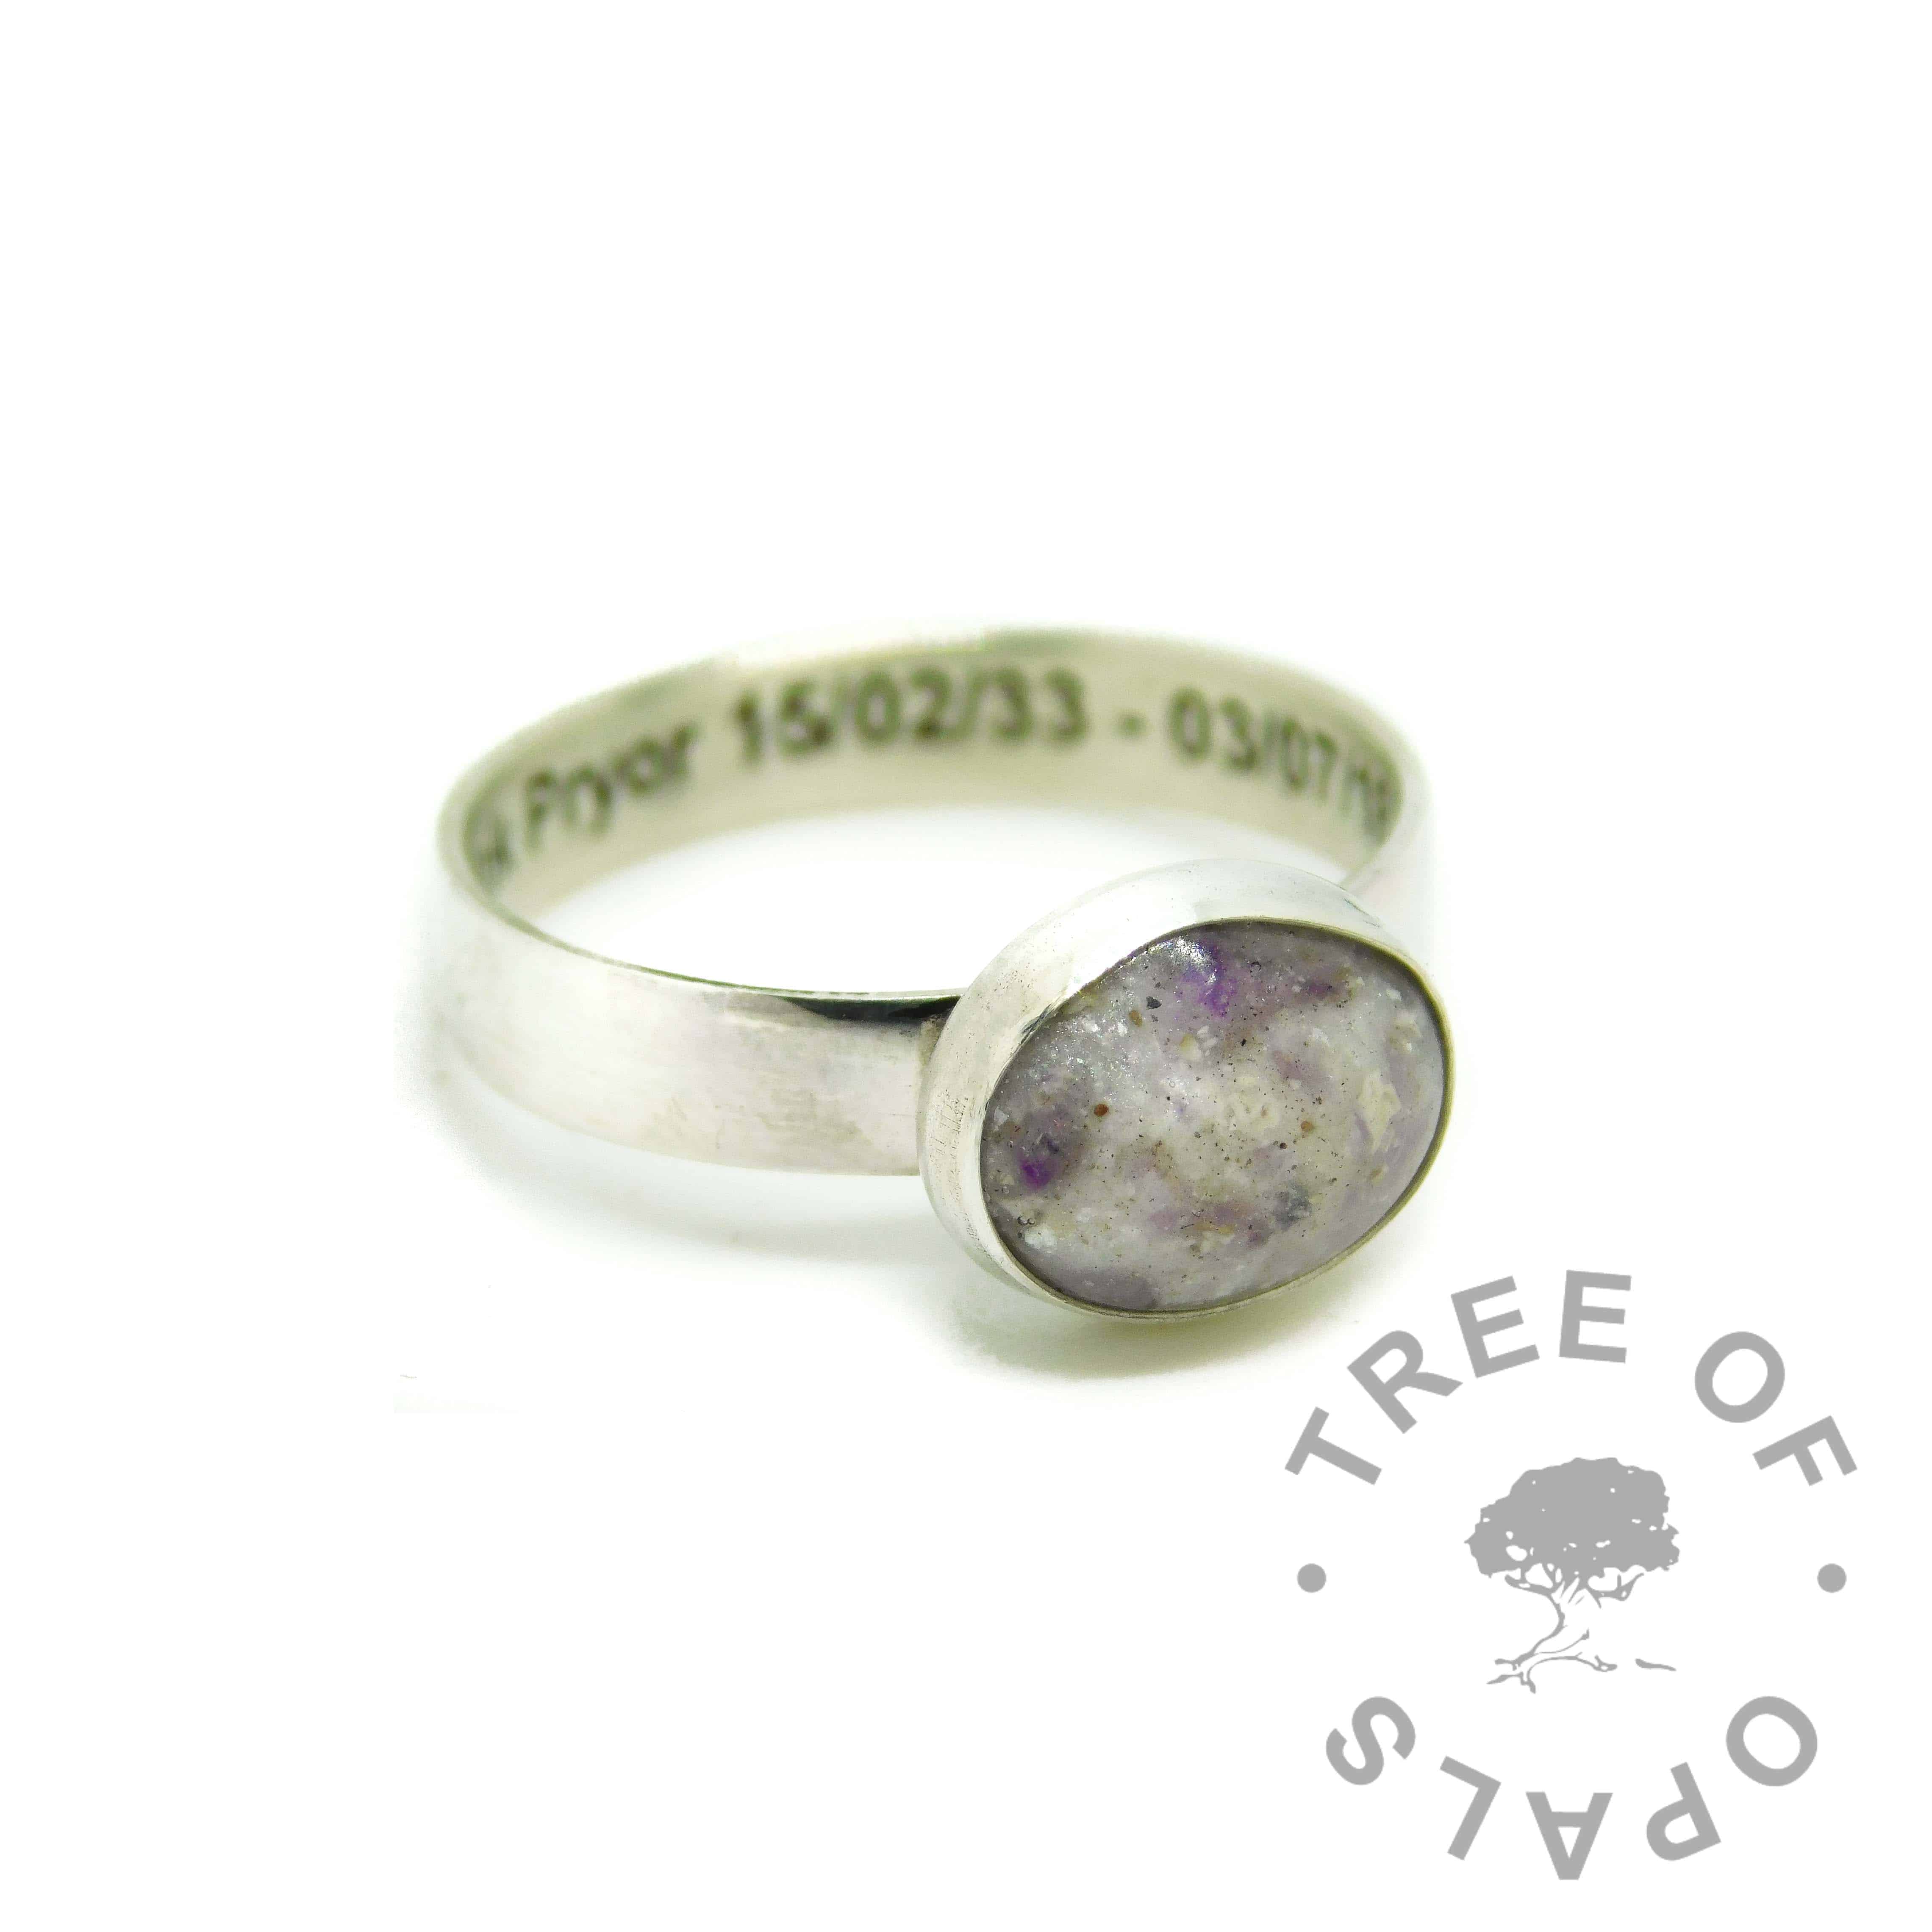 cremation ashes ring engraved on the inside in arial font. Ash and unicorn white resin sparkle mix, amethyst February birthstone